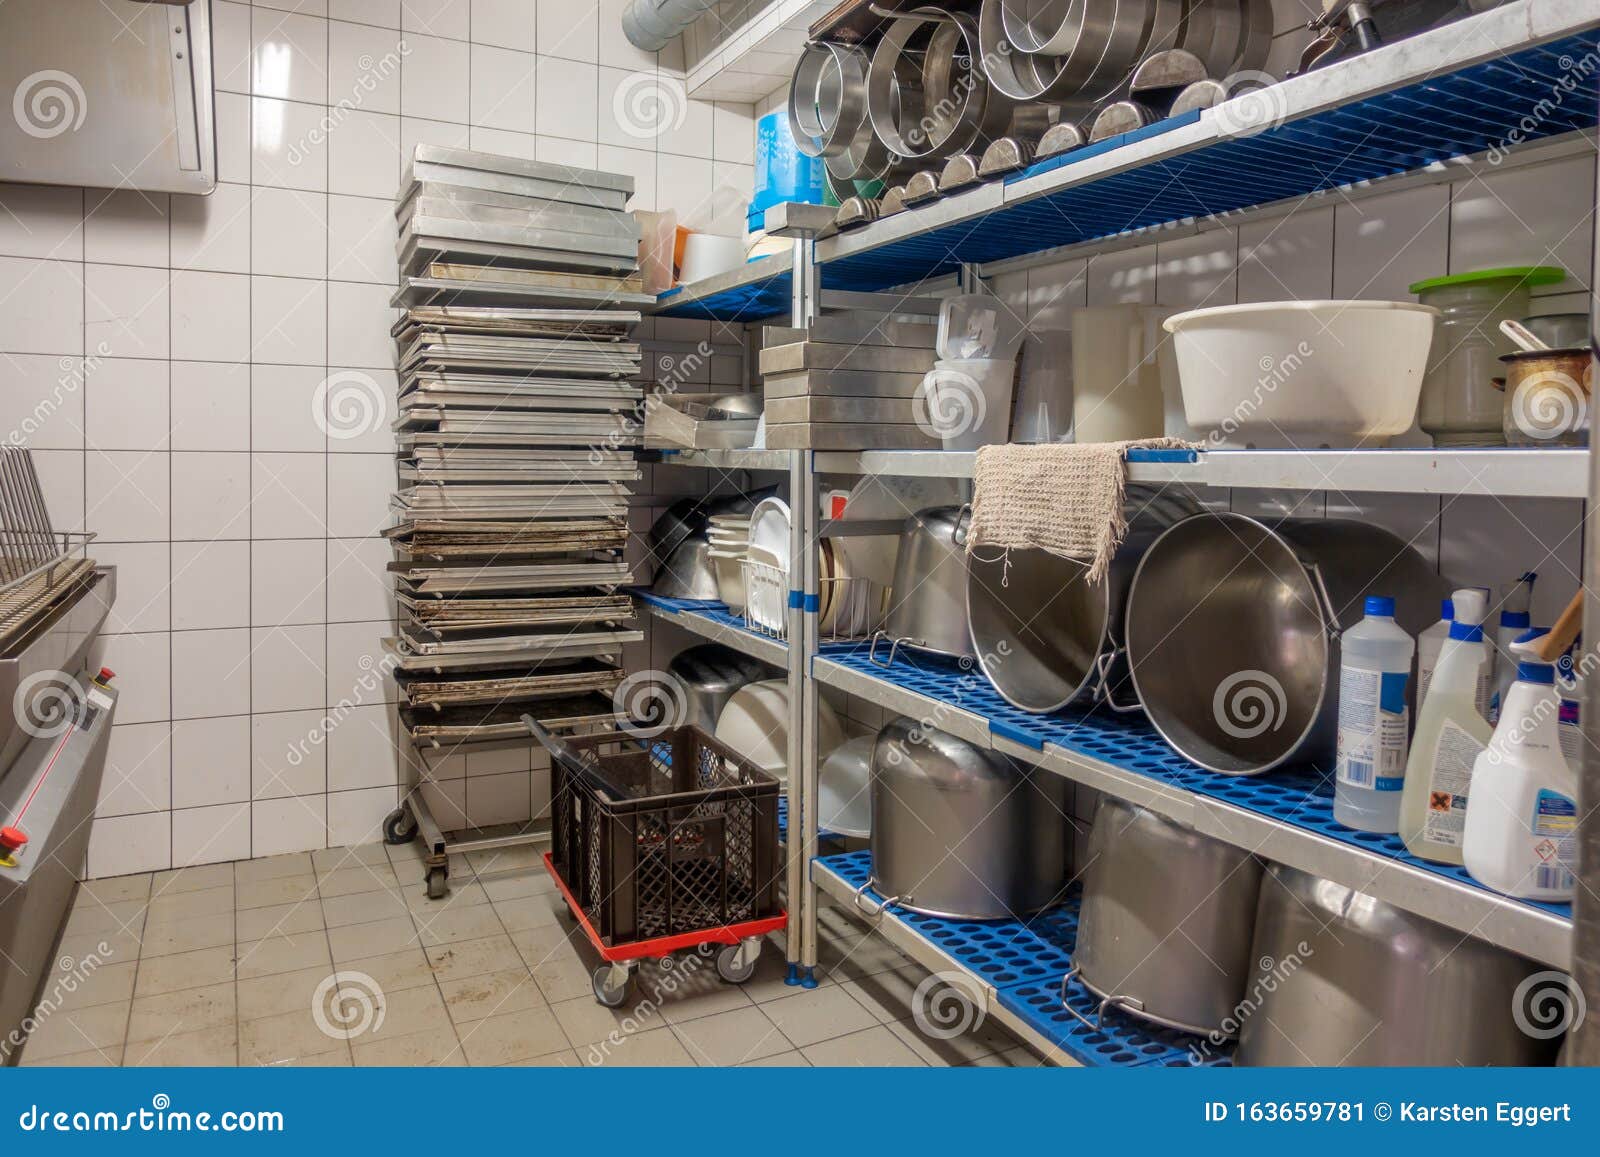 Inside A Backroom Of A Bakery After Work Stock Image Image Of Baked Bread